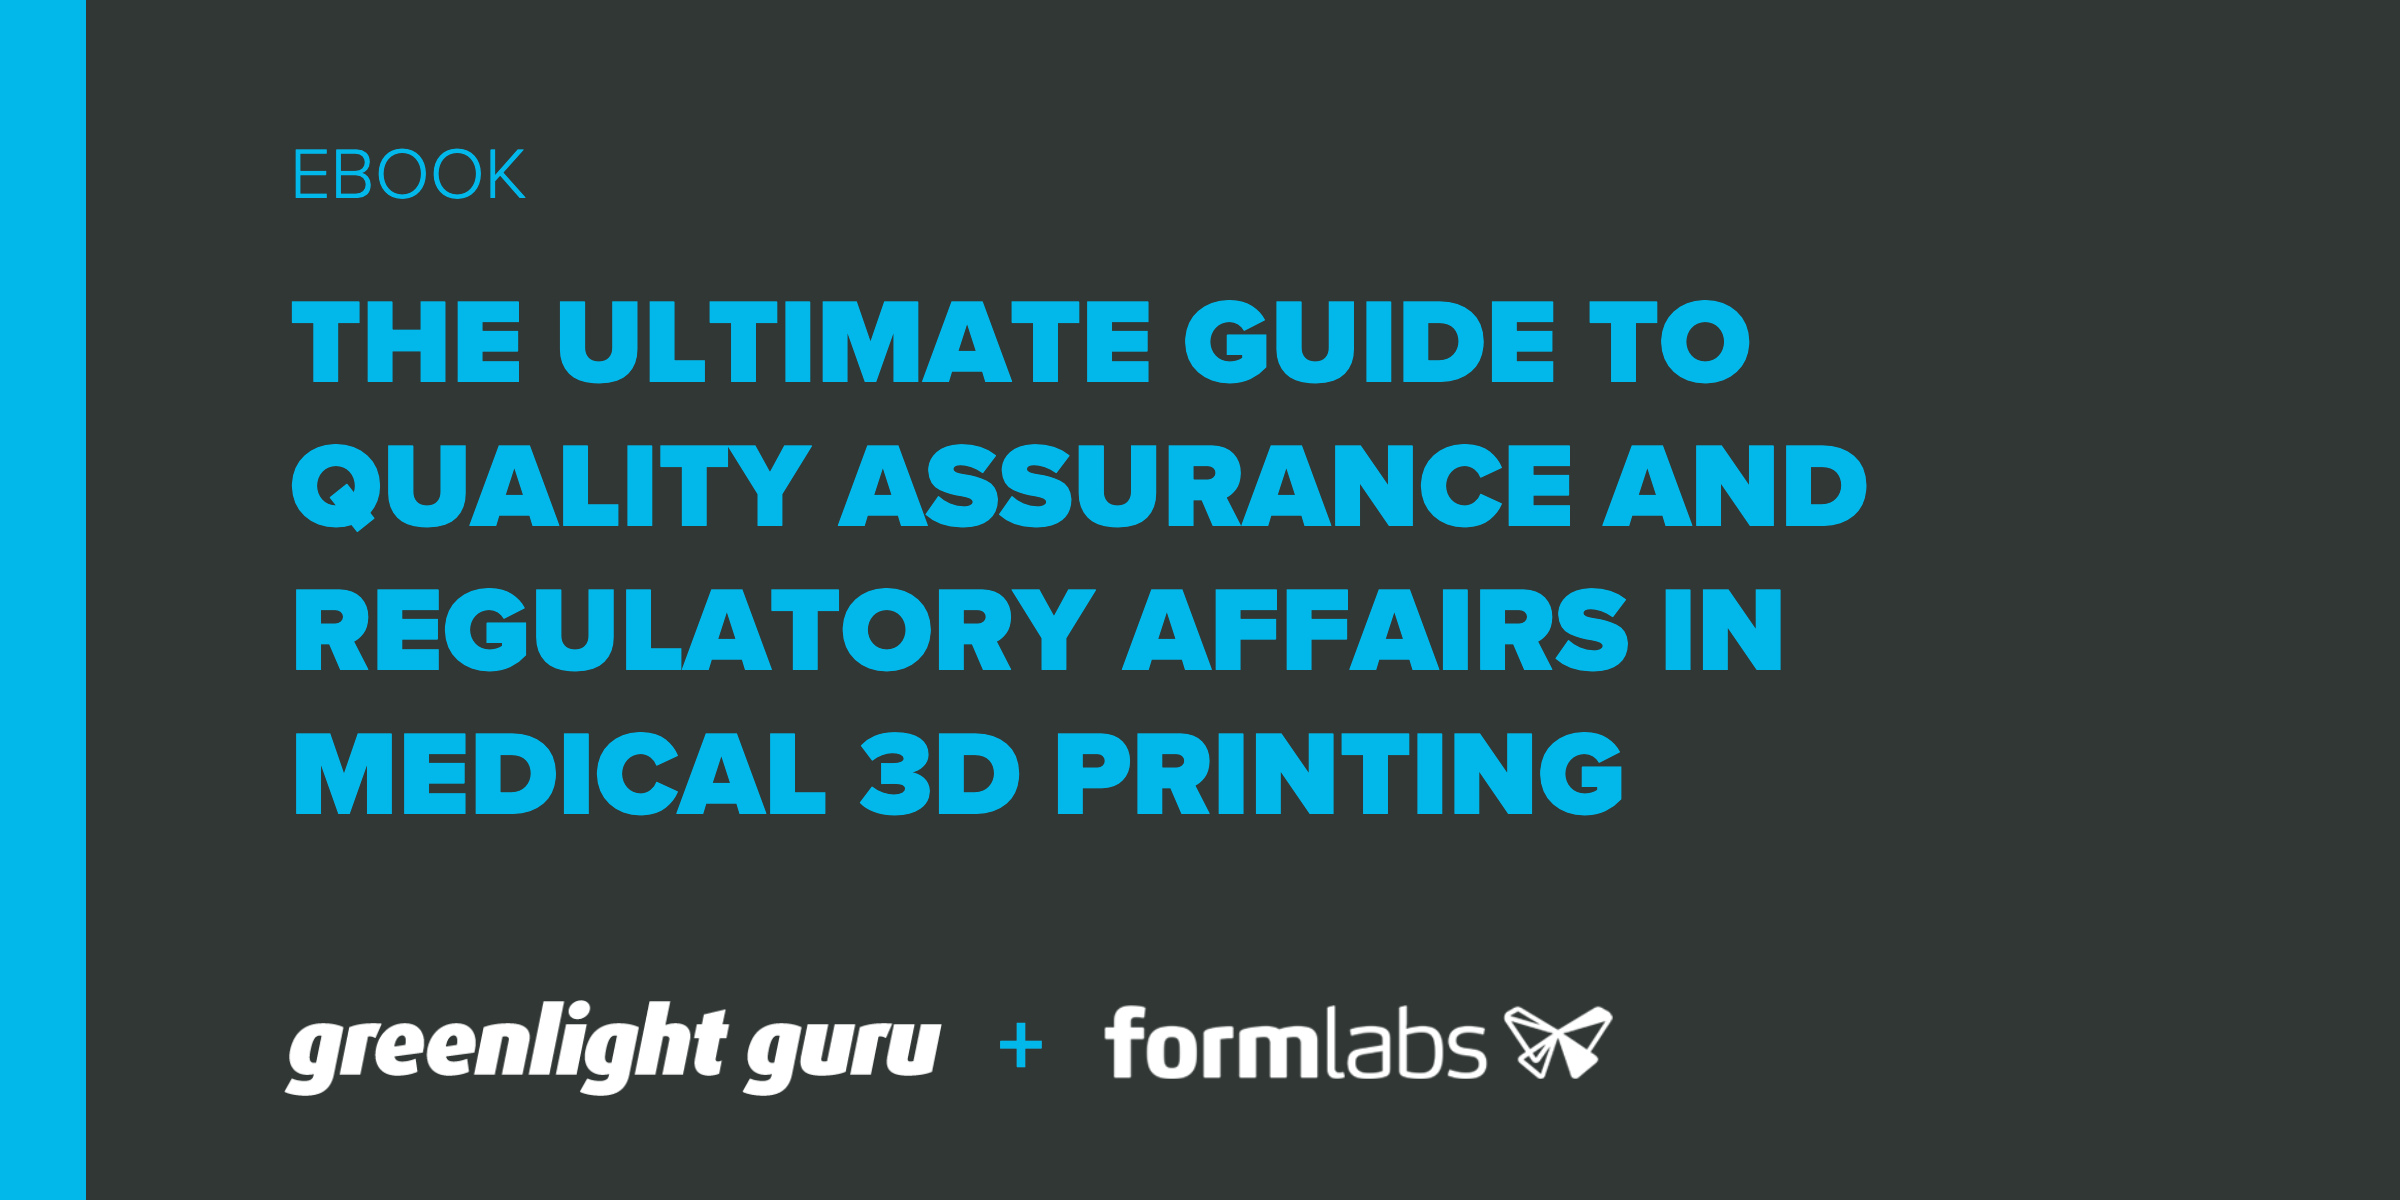 CREAT3D news: Formlabs announce new Flexible & BioMed resins